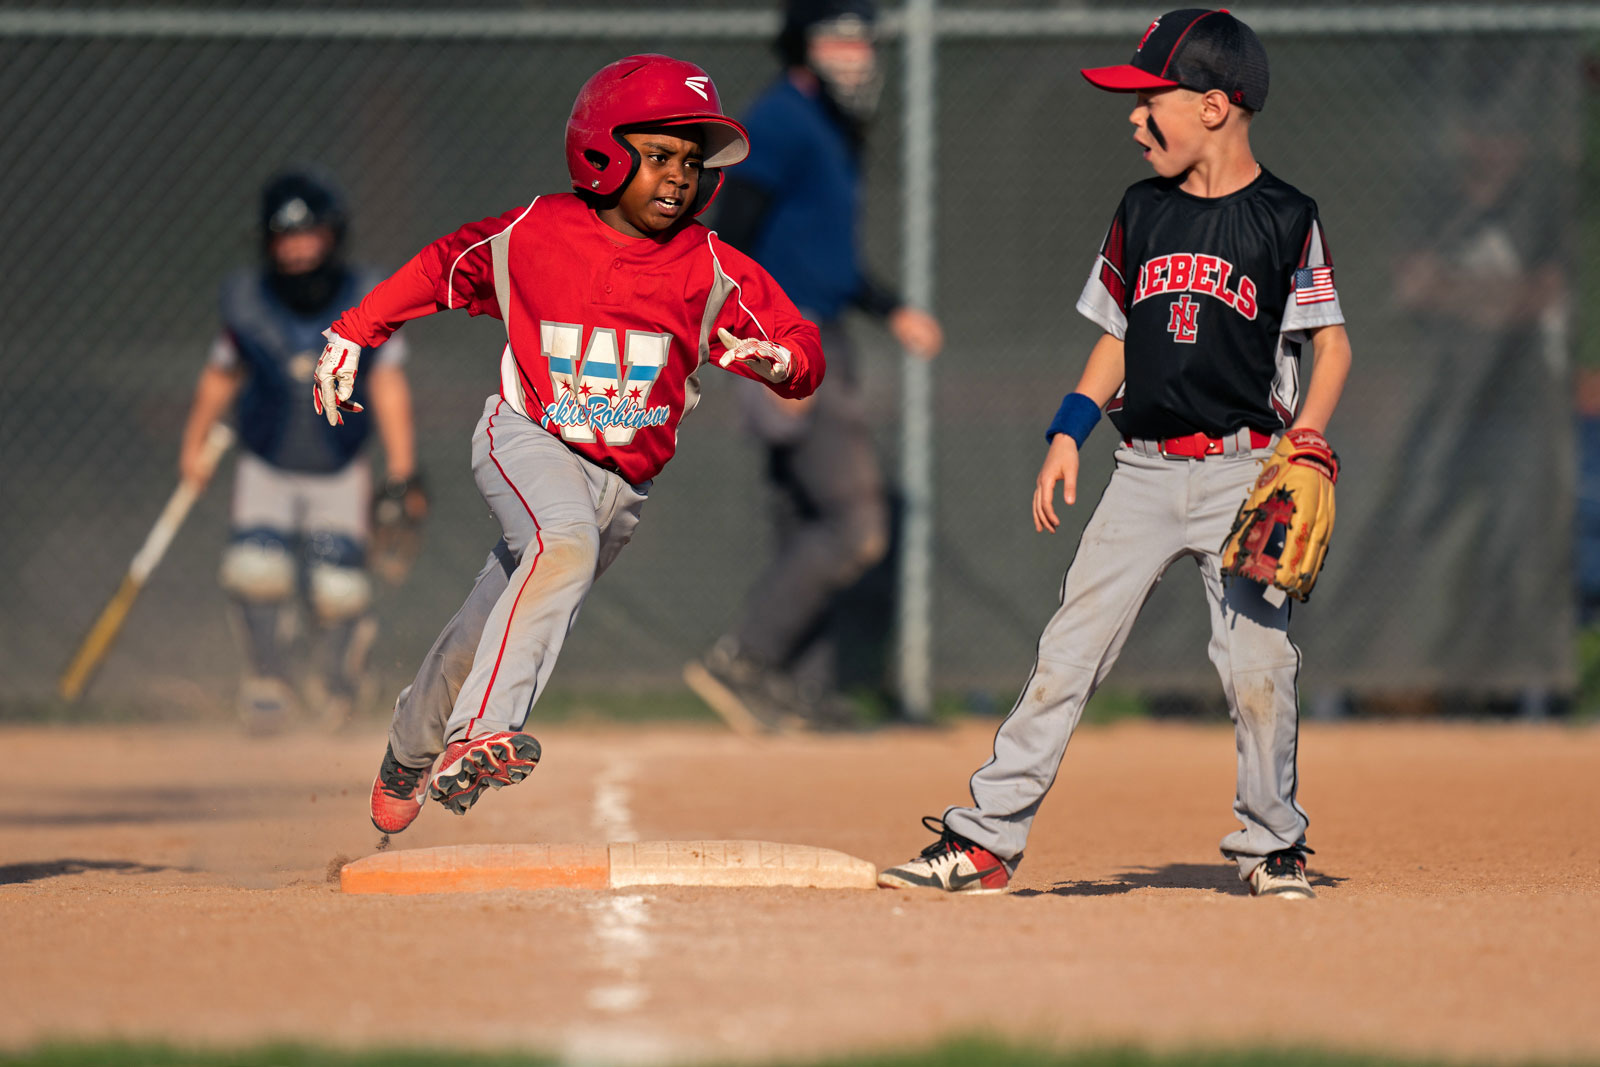 A young player with Jackie Robinson West runs the bases during the Little League game against the New Lennox Rebels, at the Tyler-Bentley Field Complex in New Lennox, Illinois